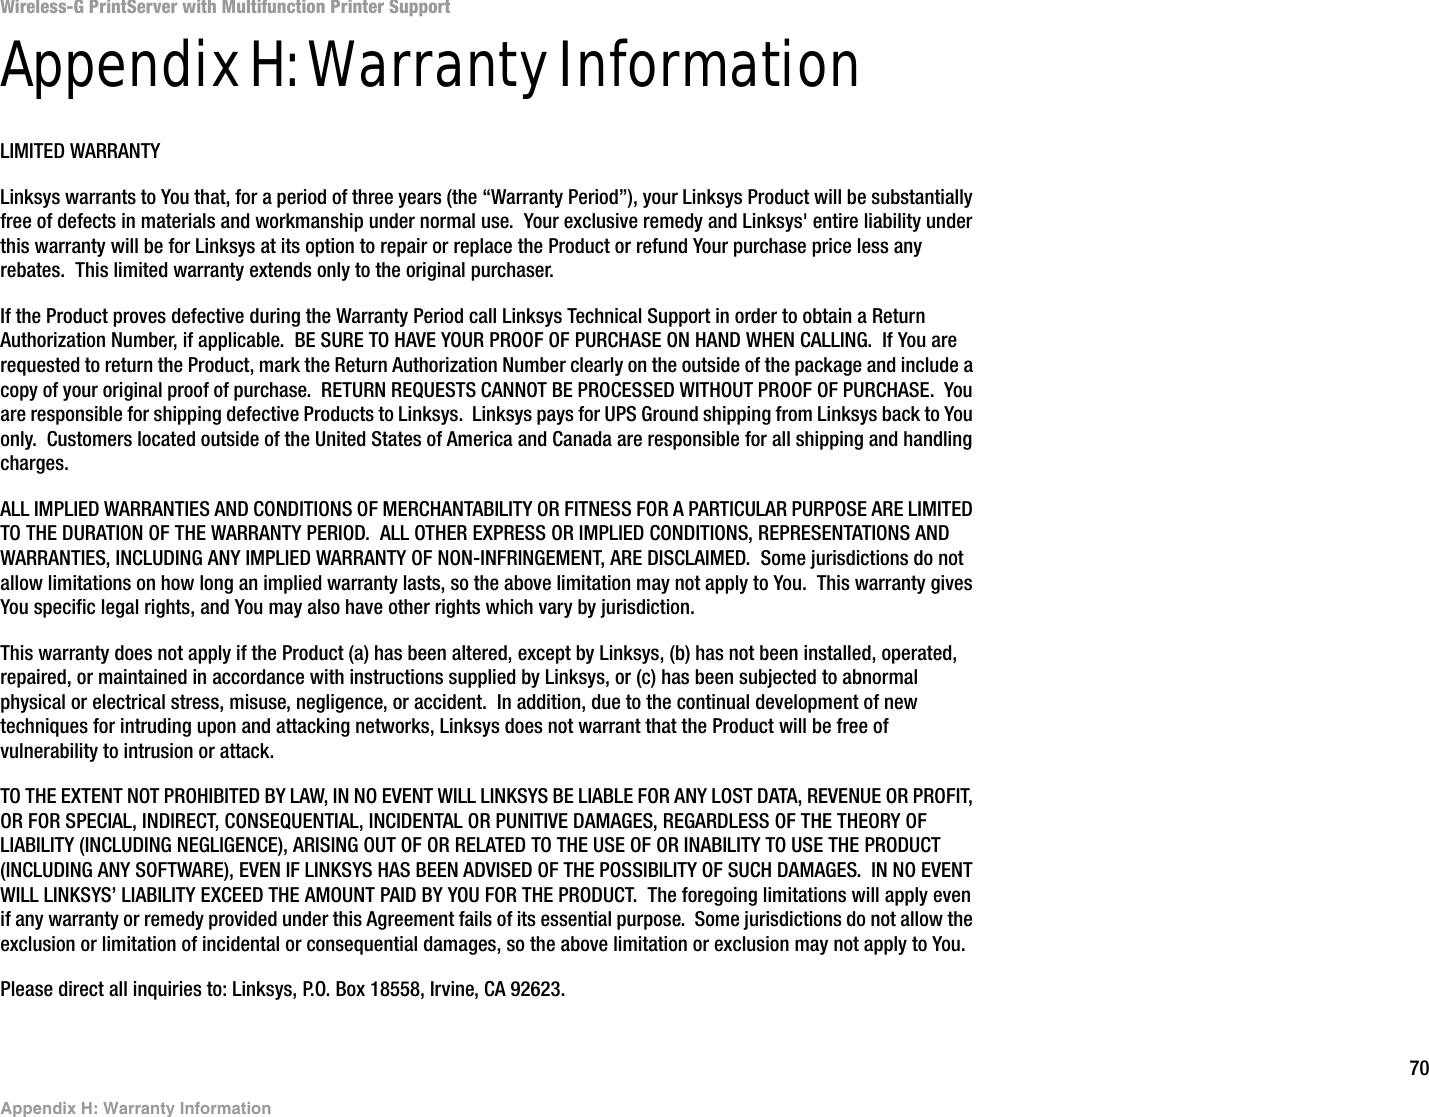 70Appendix H: Warranty InformationWireless-G PrintServer with Multifunction Printer SupportAppendix H: Warranty InformationLIMITED WARRANTYLinksys warrants to You that, for a period of three years (the “Warranty Period”), your Linksys Product will be substantially free of defects in materials and workmanship under normal use.  Your exclusive remedy and Linksys&apos; entire liability under this warranty will be for Linksys at its option to repair or replace the Product or refund Your purchase price less any rebates.  This limited warranty extends only to the original purchaser.  If the Product proves defective during the Warranty Period call Linksys Technical Support in order to obtain a Return Authorization Number, if applicable.  BE SURE TO HAVE YOUR PROOF OF PURCHASE ON HAND WHEN CALLING.  If You are requested to return the Product, mark the Return Authorization Number clearly on the outside of the package and include a copy of your original proof of purchase.  RETURN REQUESTS CANNOT BE PROCESSED WITHOUT PROOF OF PURCHASE.  You are responsible for shipping defective Products to Linksys.  Linksys pays for UPS Ground shipping from Linksys back to You only.  Customers located outside of the United States of America and Canada are responsible for all shipping and handling charges. ALL IMPLIED WARRANTIES AND CONDITIONS OF MERCHANTABILITY OR FITNESS FOR A PARTICULAR PURPOSE ARE LIMITED TO THE DURATION OF THE WARRANTY PERIOD.  ALL OTHER EXPRESS OR IMPLIED CONDITIONS, REPRESENTATIONS AND WARRANTIES, INCLUDING ANY IMPLIED WARRANTY OF NON-INFRINGEMENT, ARE DISCLAIMED.  Some jurisdictions do not allow limitations on how long an implied warranty lasts, so the above limitation may not apply to You.  This warranty gives You specific legal rights, and You may also have other rights which vary by jurisdiction.This warranty does not apply if the Product (a) has been altered, except by Linksys, (b) has not been installed, operated, repaired, or maintained in accordance with instructions supplied by Linksys, or (c) has been subjected to abnormal physical or electrical stress, misuse, negligence, or accident.  In addition, due to the continual development of new techniques for intruding upon and attacking networks, Linksys does not warrant that the Product will be free of vulnerability to intrusion or attack.TO THE EXTENT NOT PROHIBITED BY LAW, IN NO EVENT WILL LINKSYS BE LIABLE FOR ANY LOST DATA, REVENUE OR PROFIT, OR FOR SPECIAL, INDIRECT, CONSEQUENTIAL, INCIDENTAL OR PUNITIVE DAMAGES, REGARDLESS OF THE THEORY OF LIABILITY (INCLUDING NEGLIGENCE), ARISING OUT OF OR RELATED TO THE USE OF OR INABILITY TO USE THE PRODUCT (INCLUDING ANY SOFTWARE), EVEN IF LINKSYS HAS BEEN ADVISED OF THE POSSIBILITY OF SUCH DAMAGES.  IN NO EVENT WILL LINKSYS’ LIABILITY EXCEED THE AMOUNT PAID BY YOU FOR THE PRODUCT.  The foregoing limitations will apply even if any warranty or remedy provided under this Agreement fails of its essential purpose.  Some jurisdictions do not allow the exclusion or limitation of incidental or consequential damages, so the above limitation or exclusion may not apply to You.Please direct all inquiries to: Linksys, P.O. Box 18558, Irvine, CA 92623.